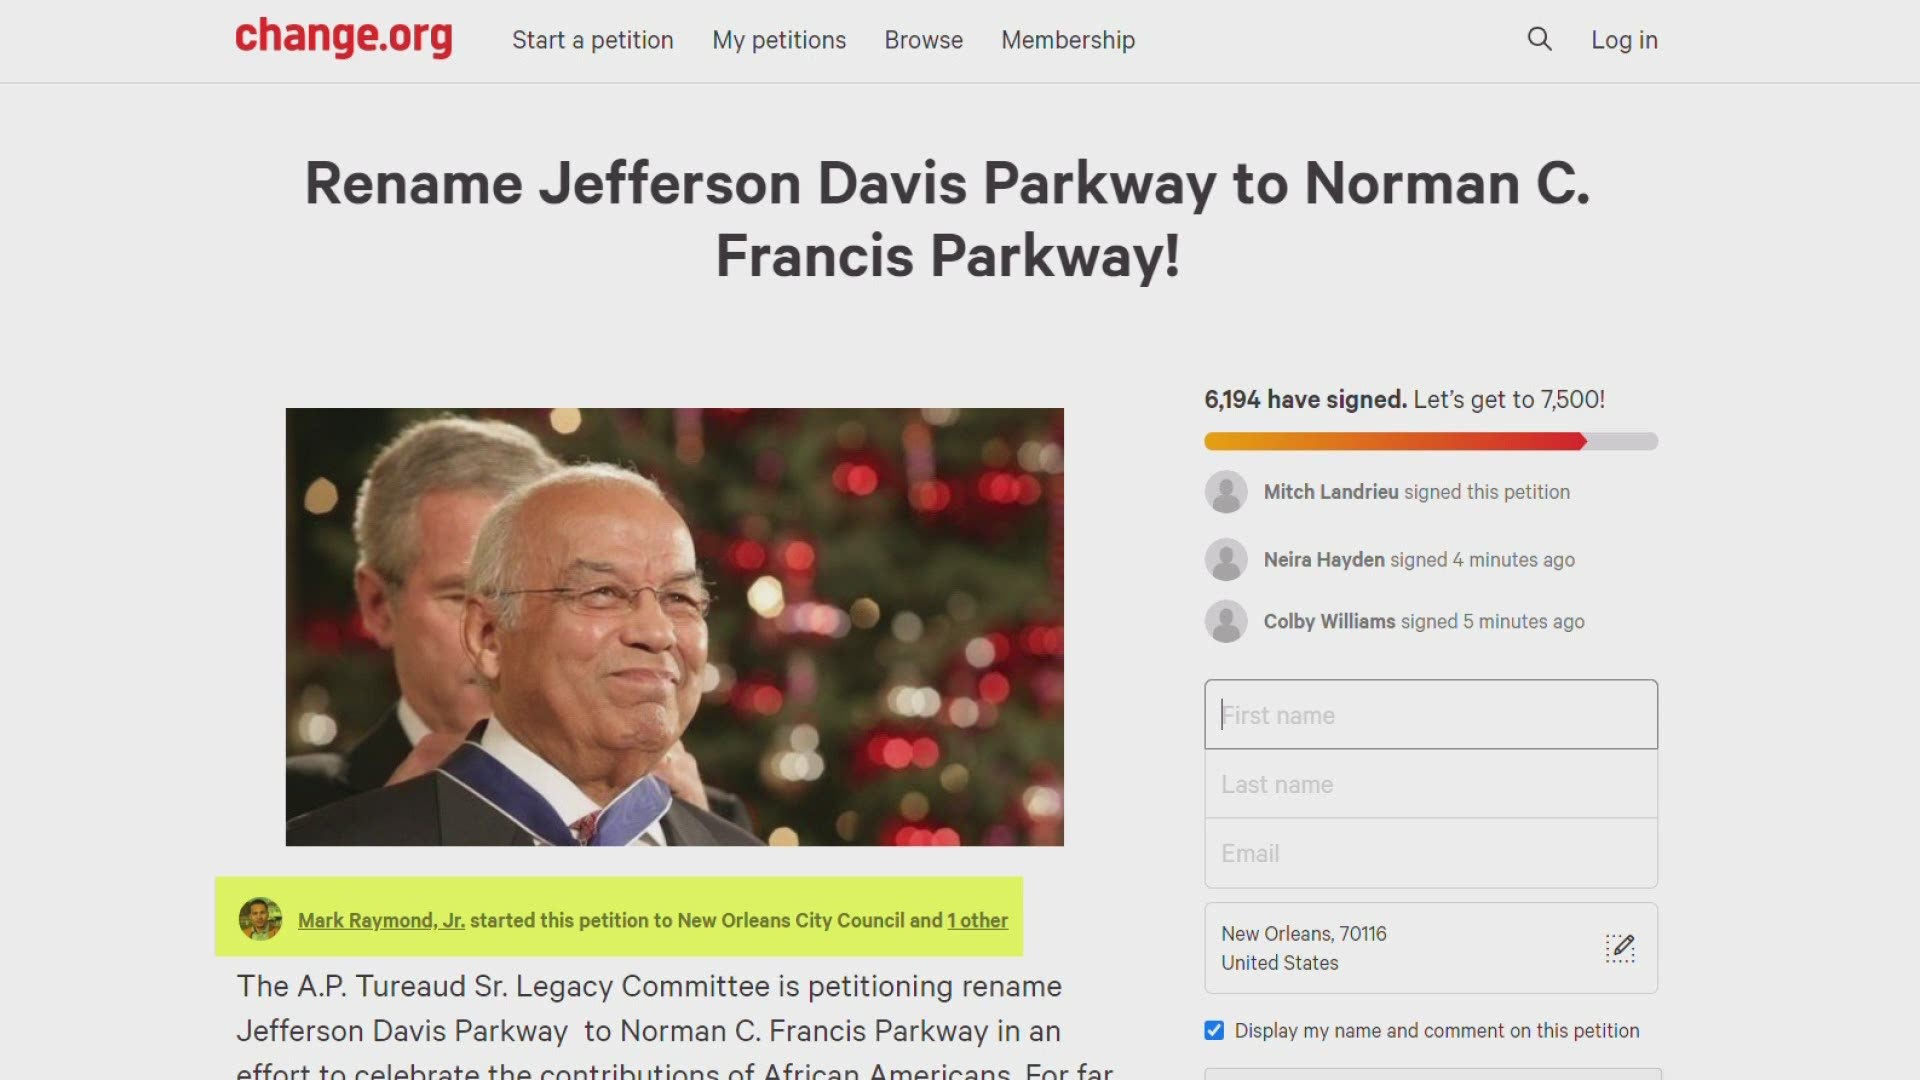 An online petition has started to change the name of Jefferson Davis Parkway to Norman Francis Parkway.